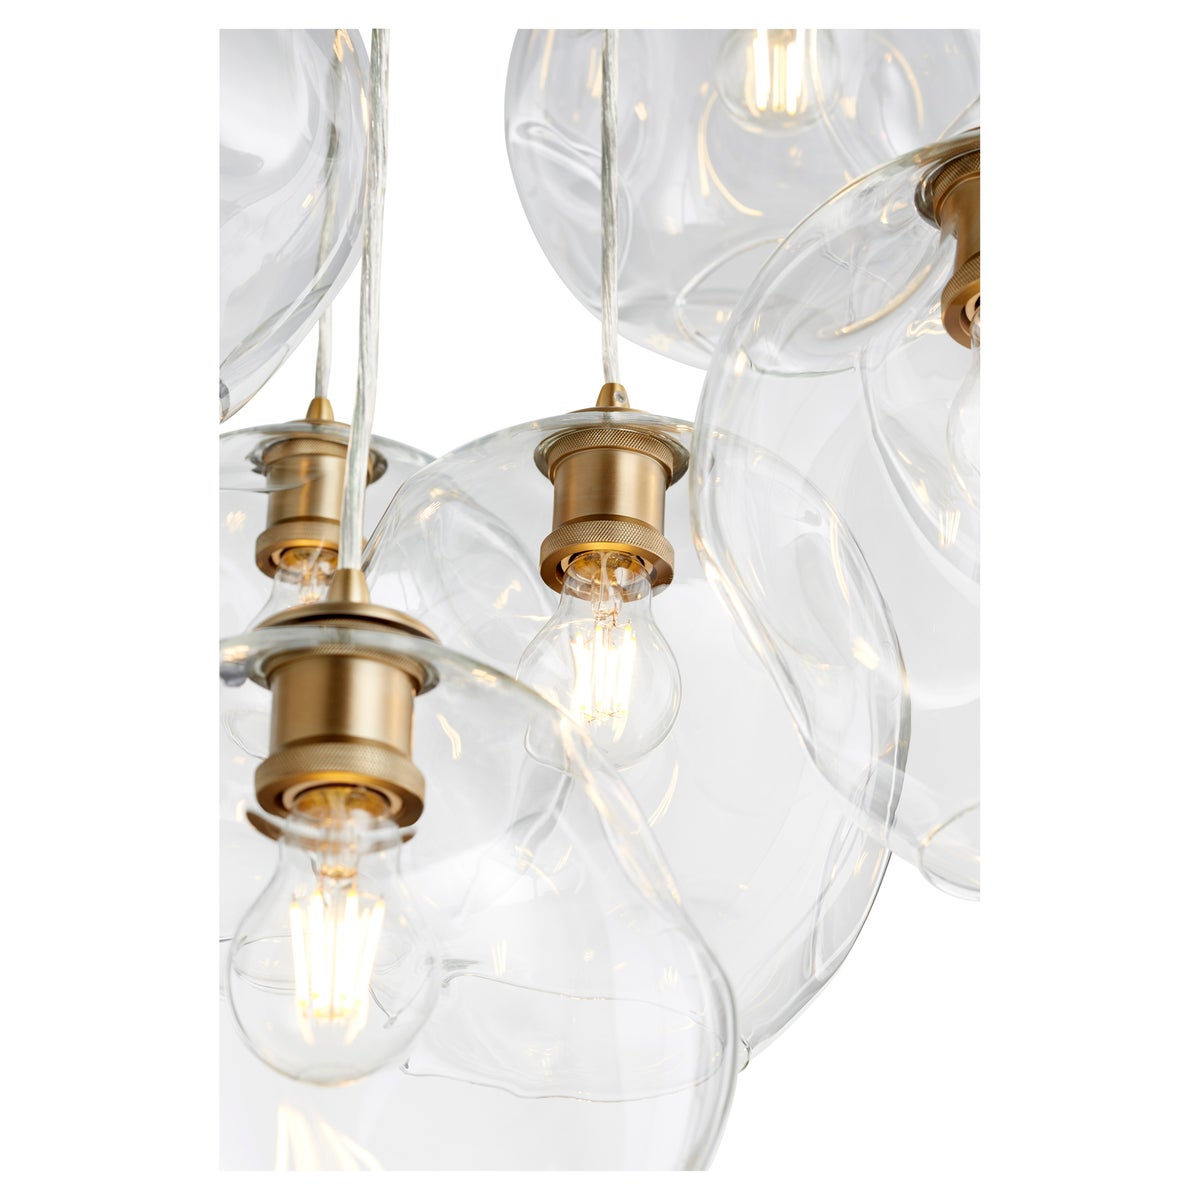 Cluster Pendant Light with clear wavy glass globe shade and adjustable cord suspended from a matching canopy. Crafted of metal in a stylish finish. Brighten your space in contemporary style.